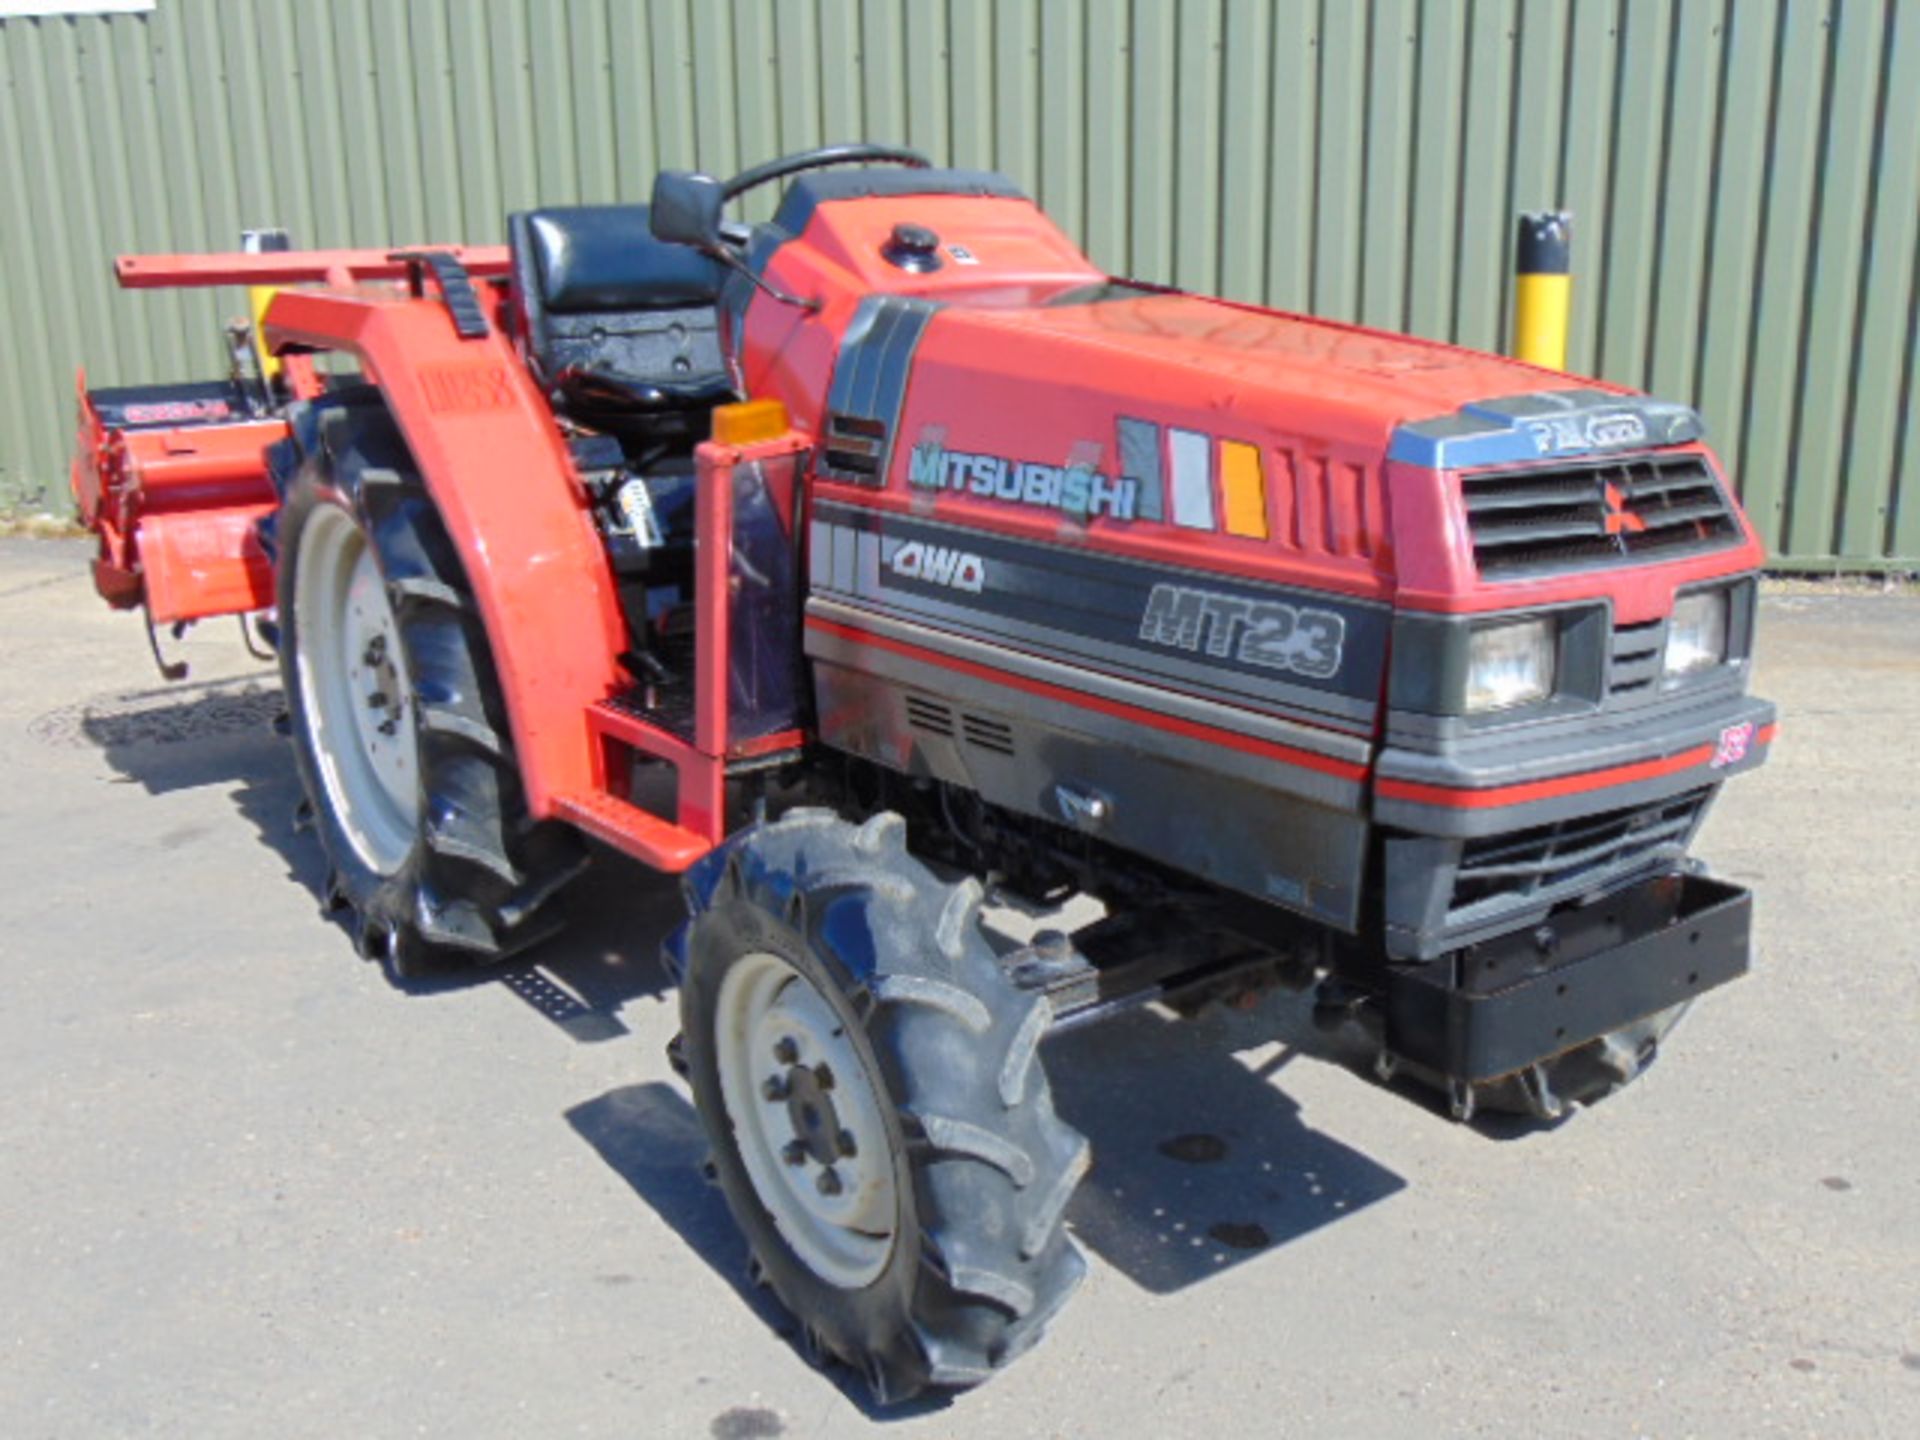 Mitsubishi MT23 4x4 Compact Tractor c/w Rotavator ONLY 1,383 HOURS! - Image 2 of 21